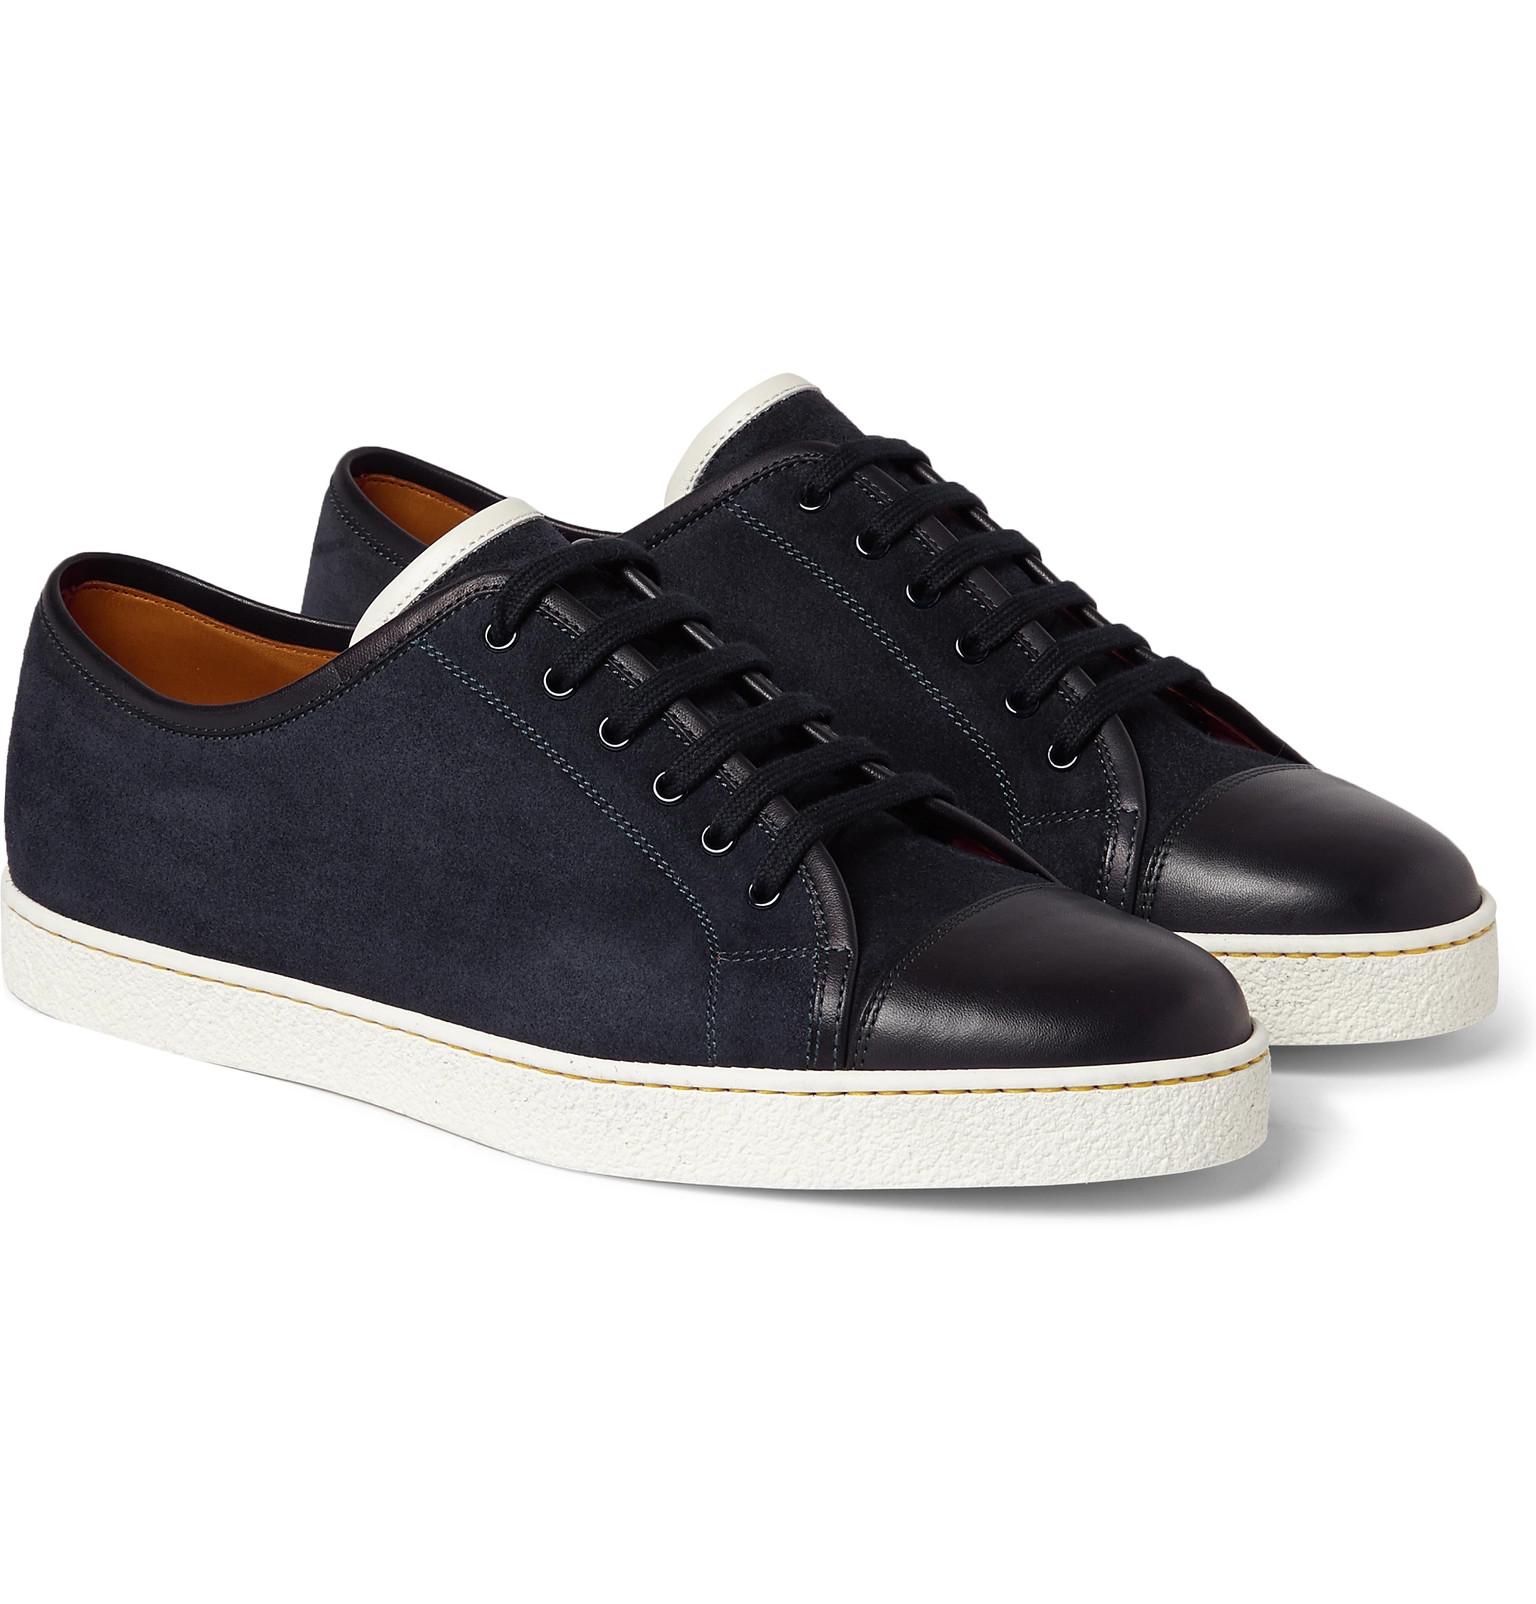 John Lobb Levah Suede And Leather Sneakers in Navy (Blue) for Men - Lyst